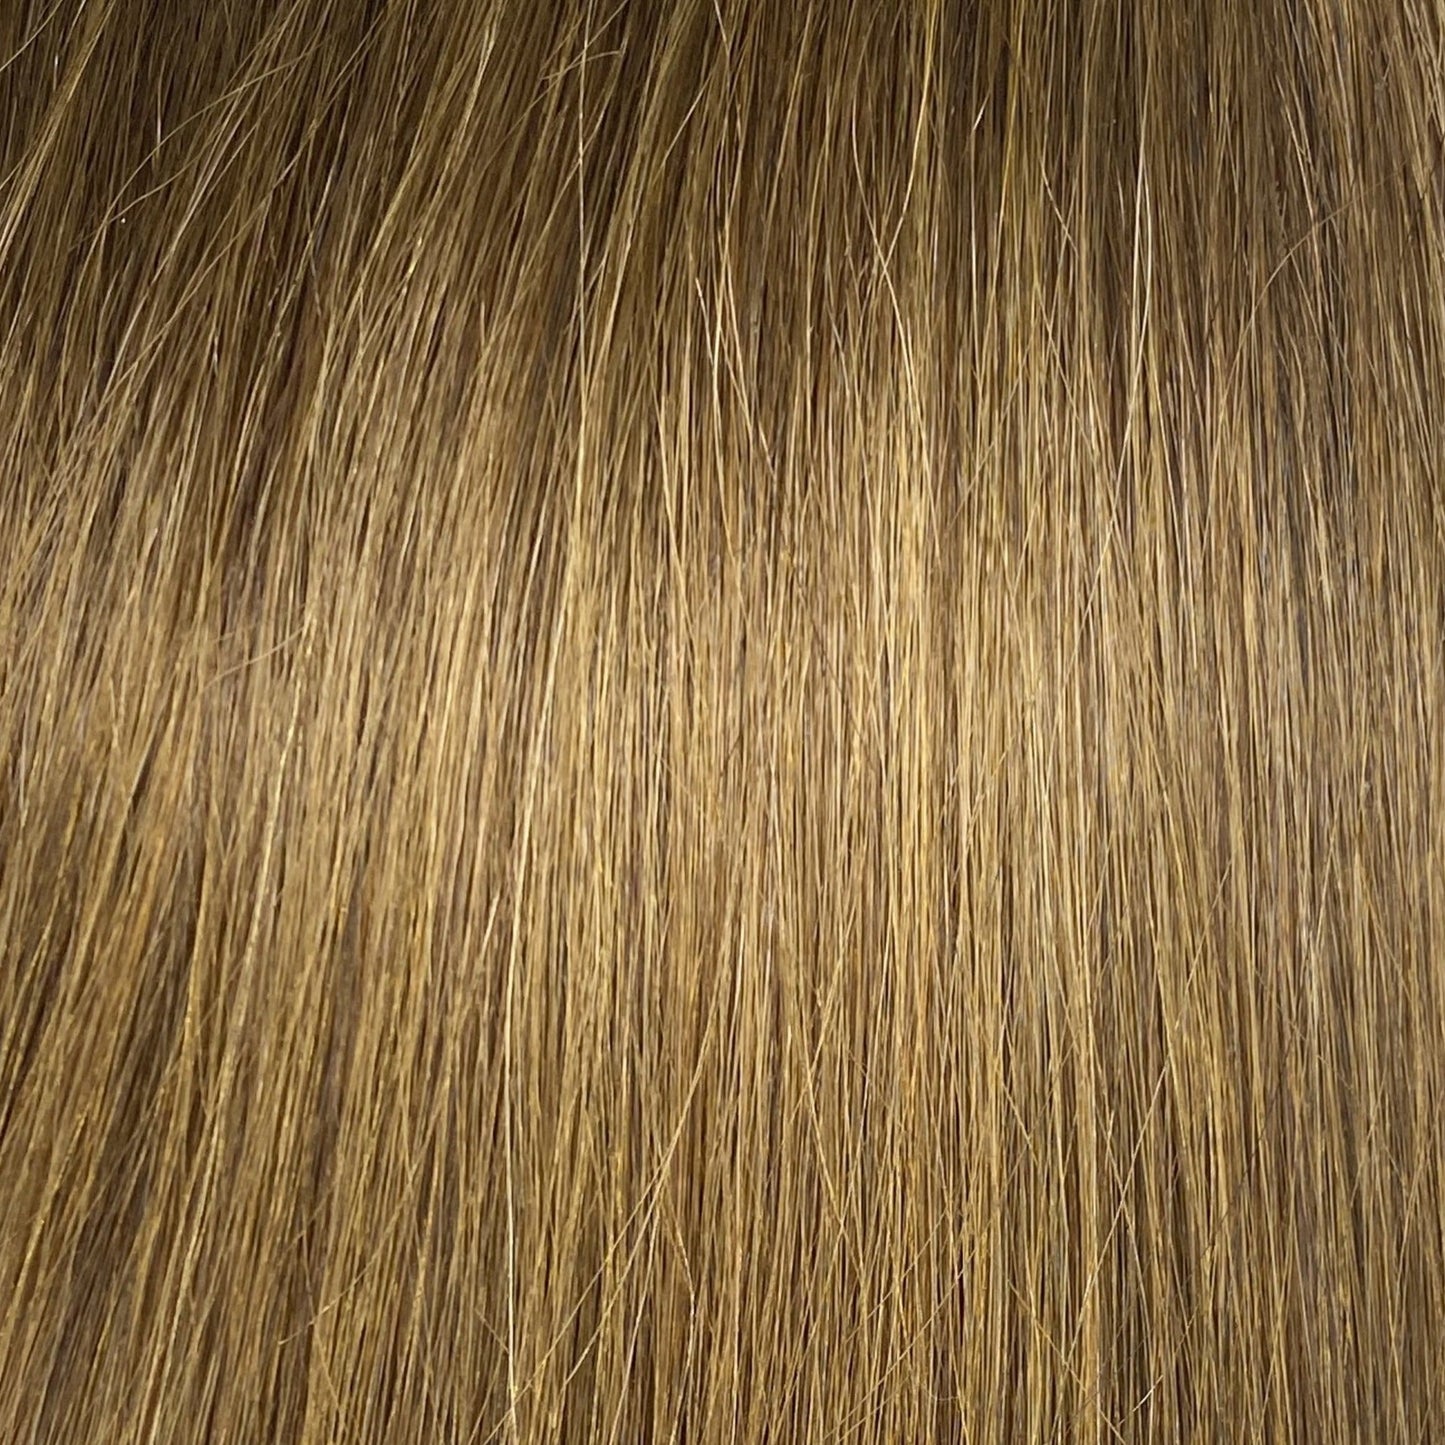 Velo #2 - 16 inches - Chestnut Velo DR Hair Products Co 